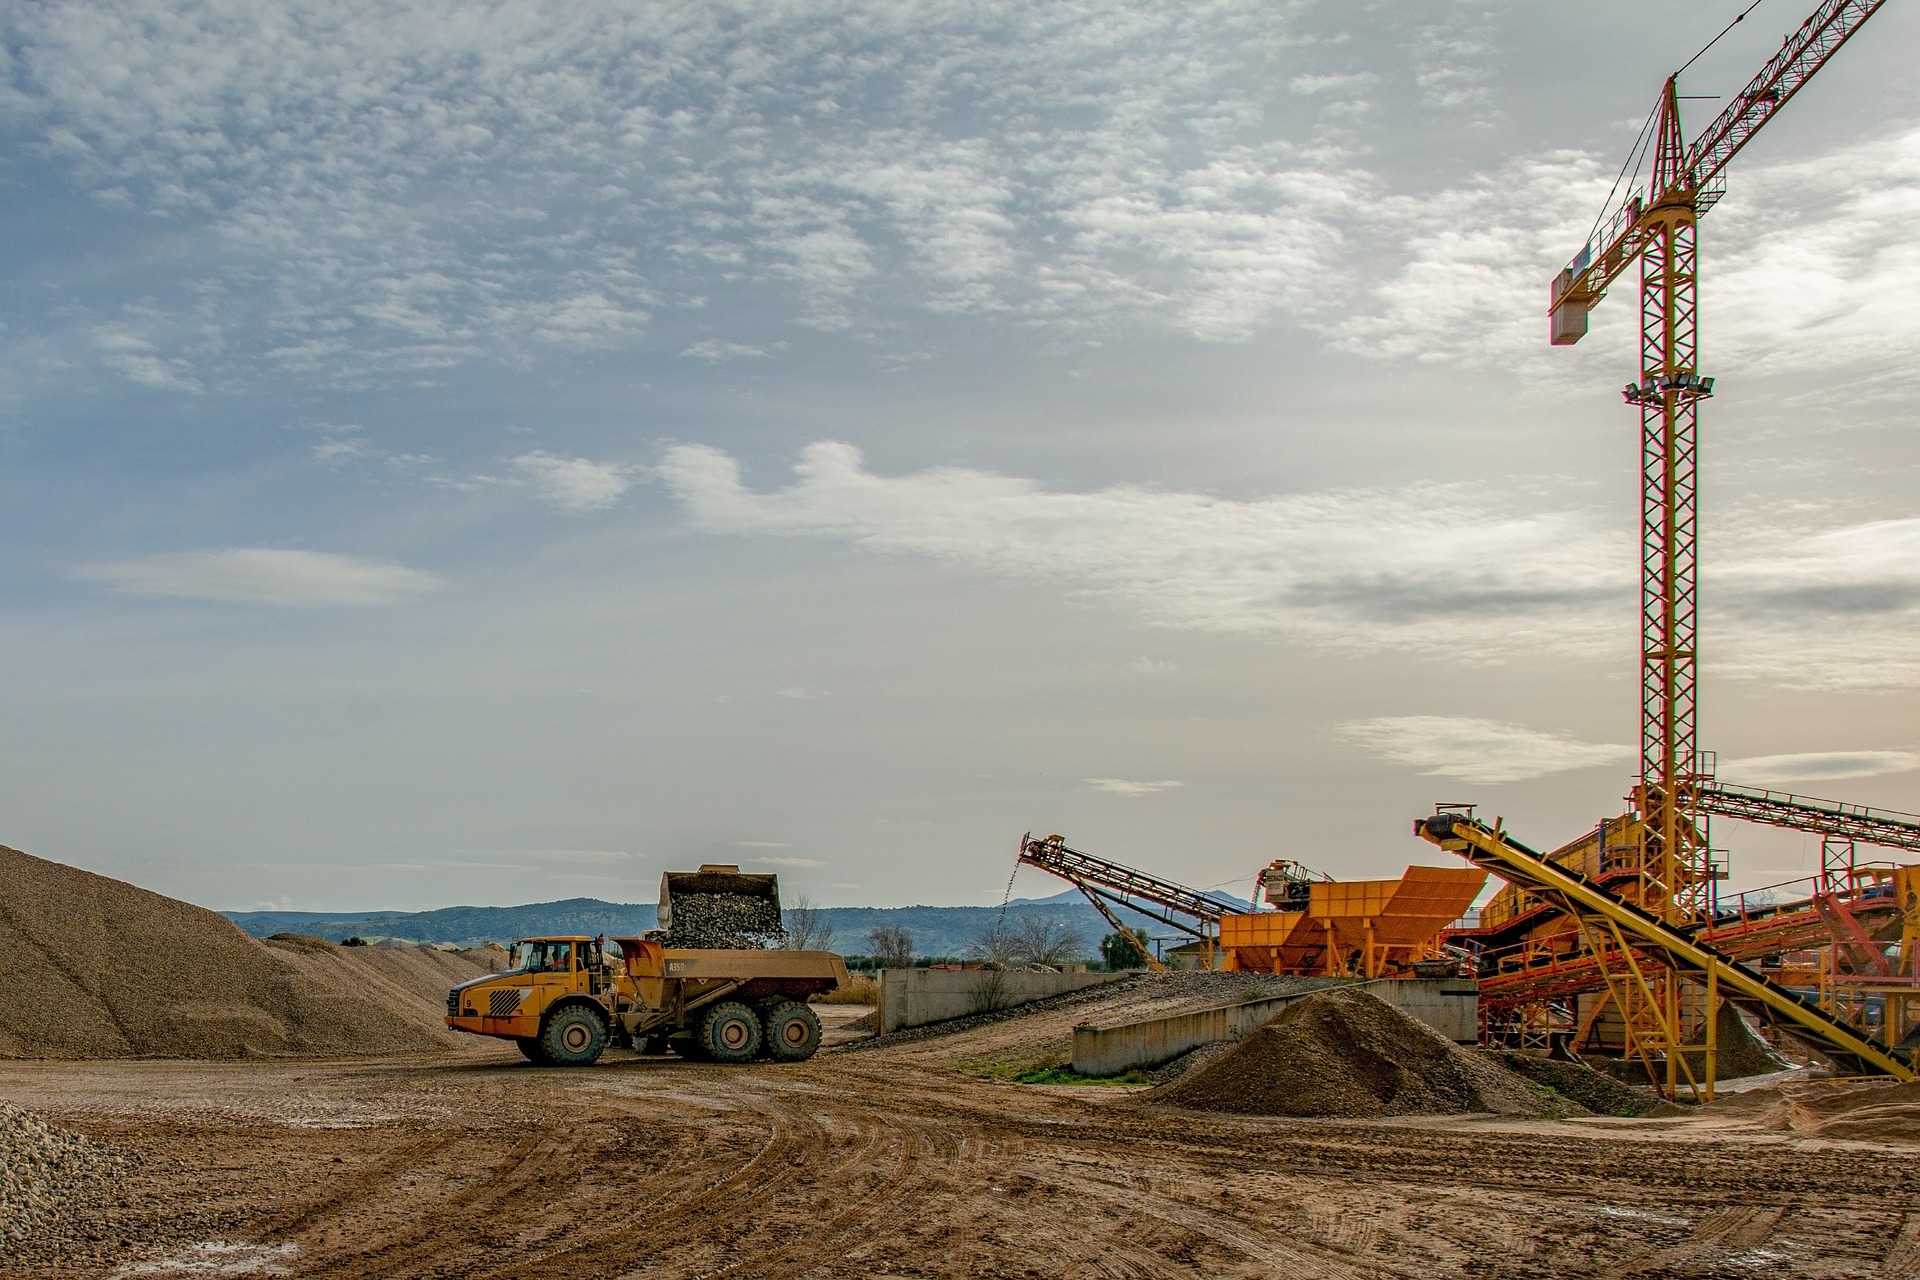 Image of machinery in a gravel pit